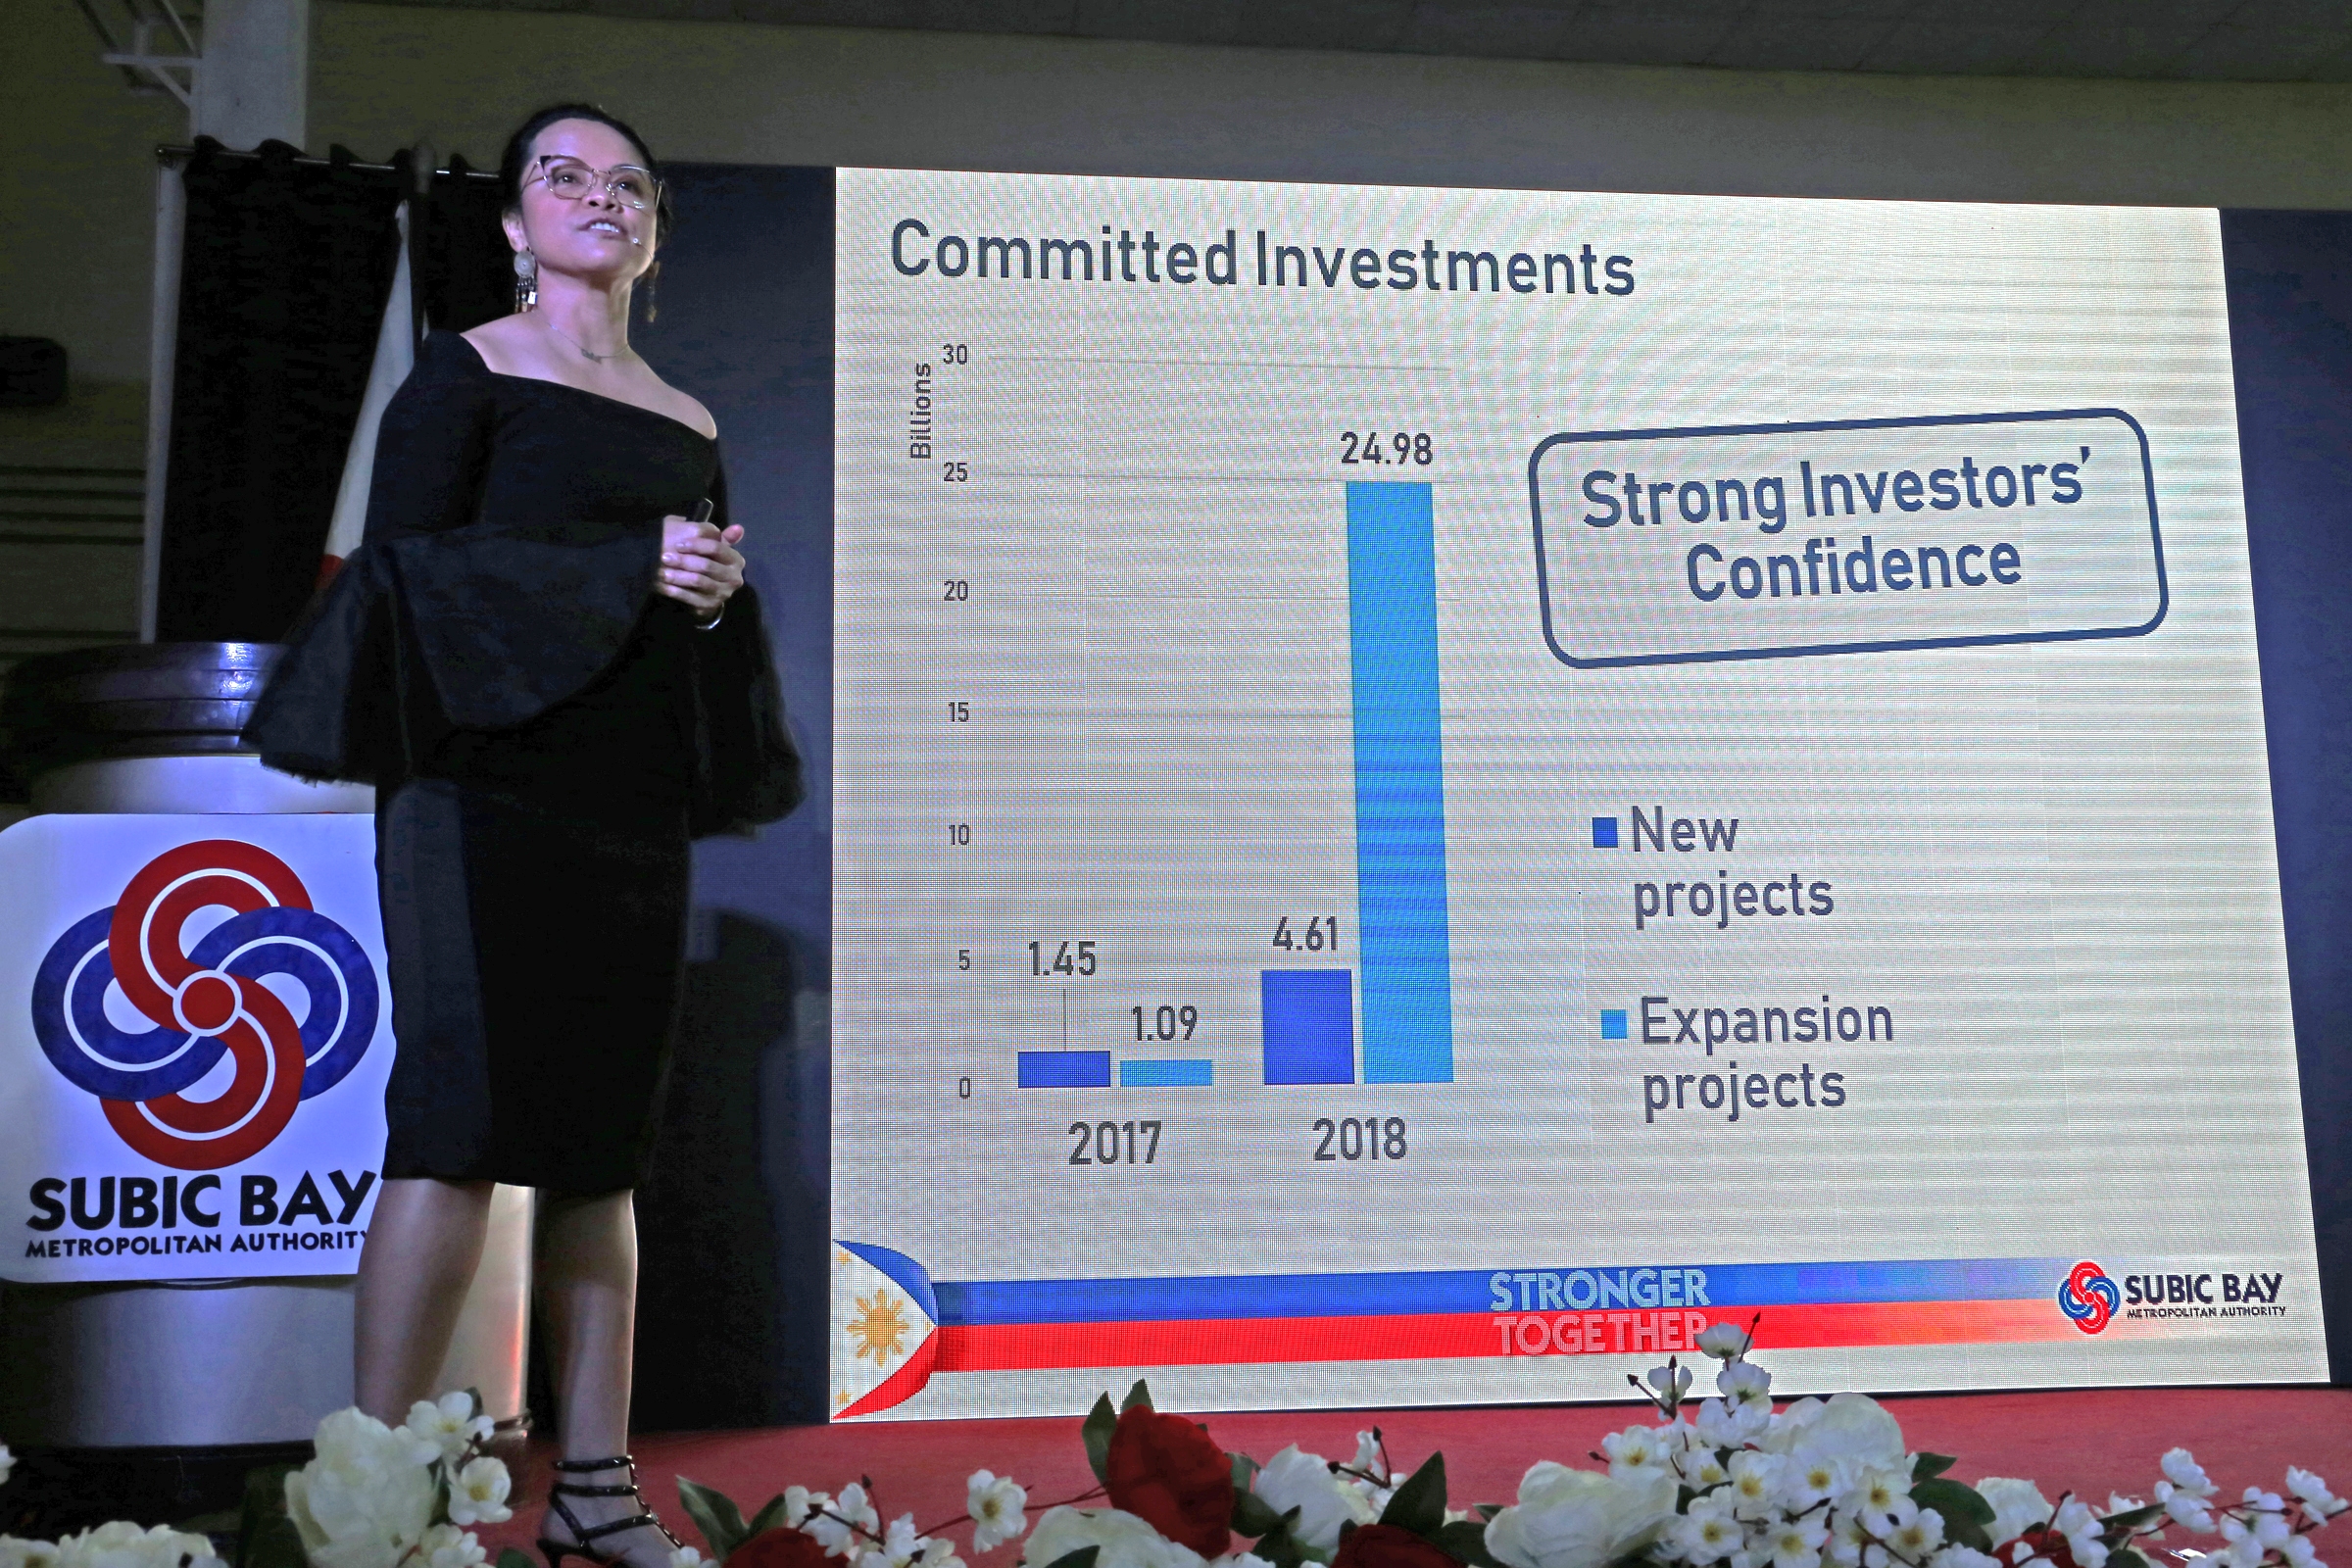 SBMA Chairman and Administrator Wilma T. Eisma reports on the record-breaking 2018 performance of the Subic Bay Freeport Zone during her State of the Freeport Address on Wednesday, March 6.